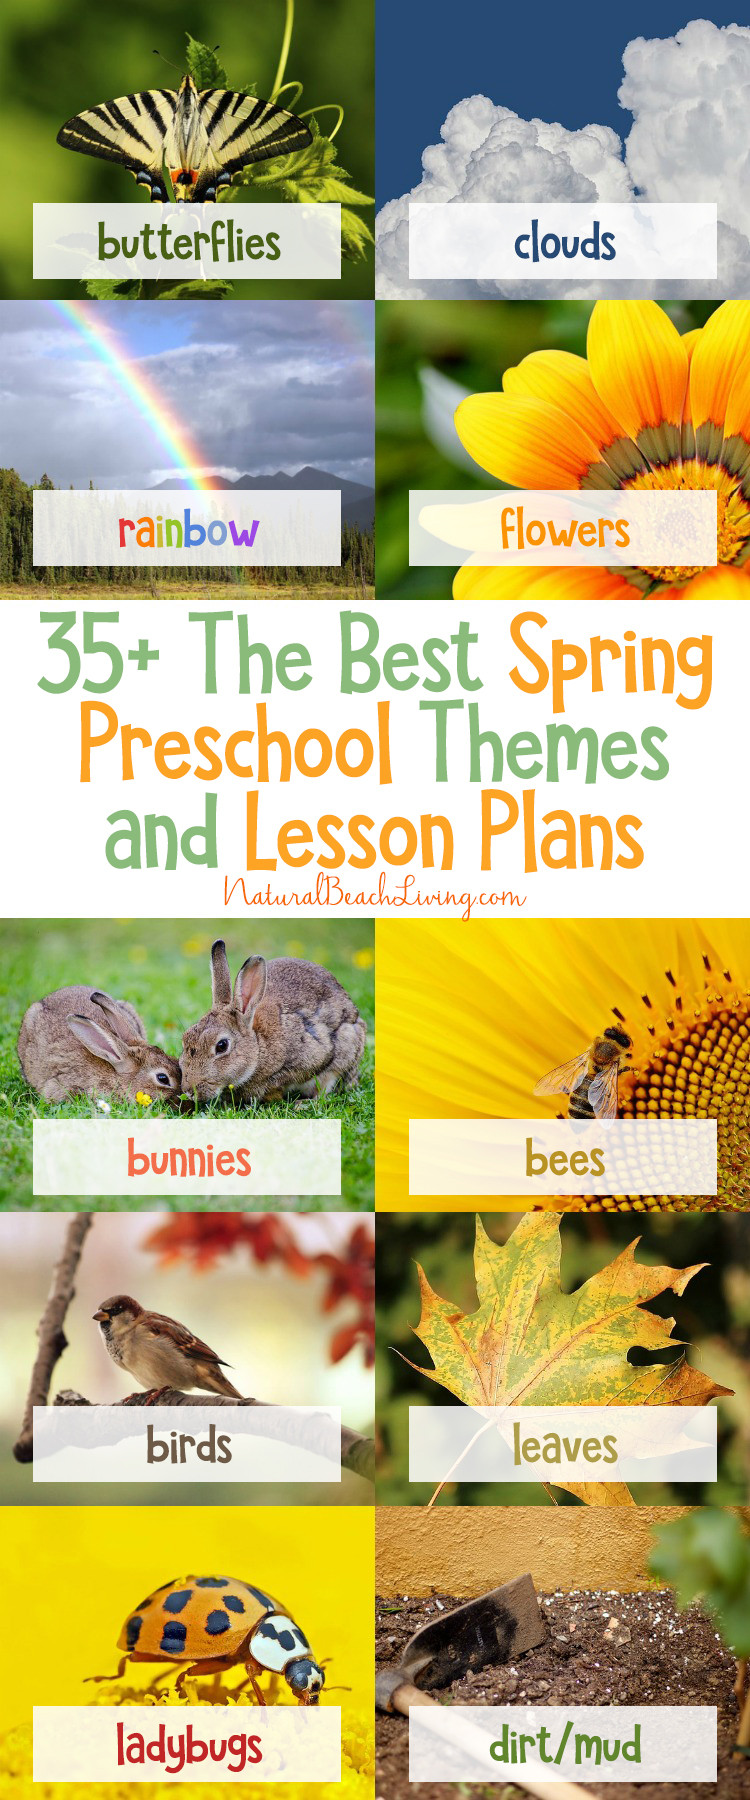 Spring Lesson Plans for toddlers 35 the Best Spring Preschool themes and Lesson Plans